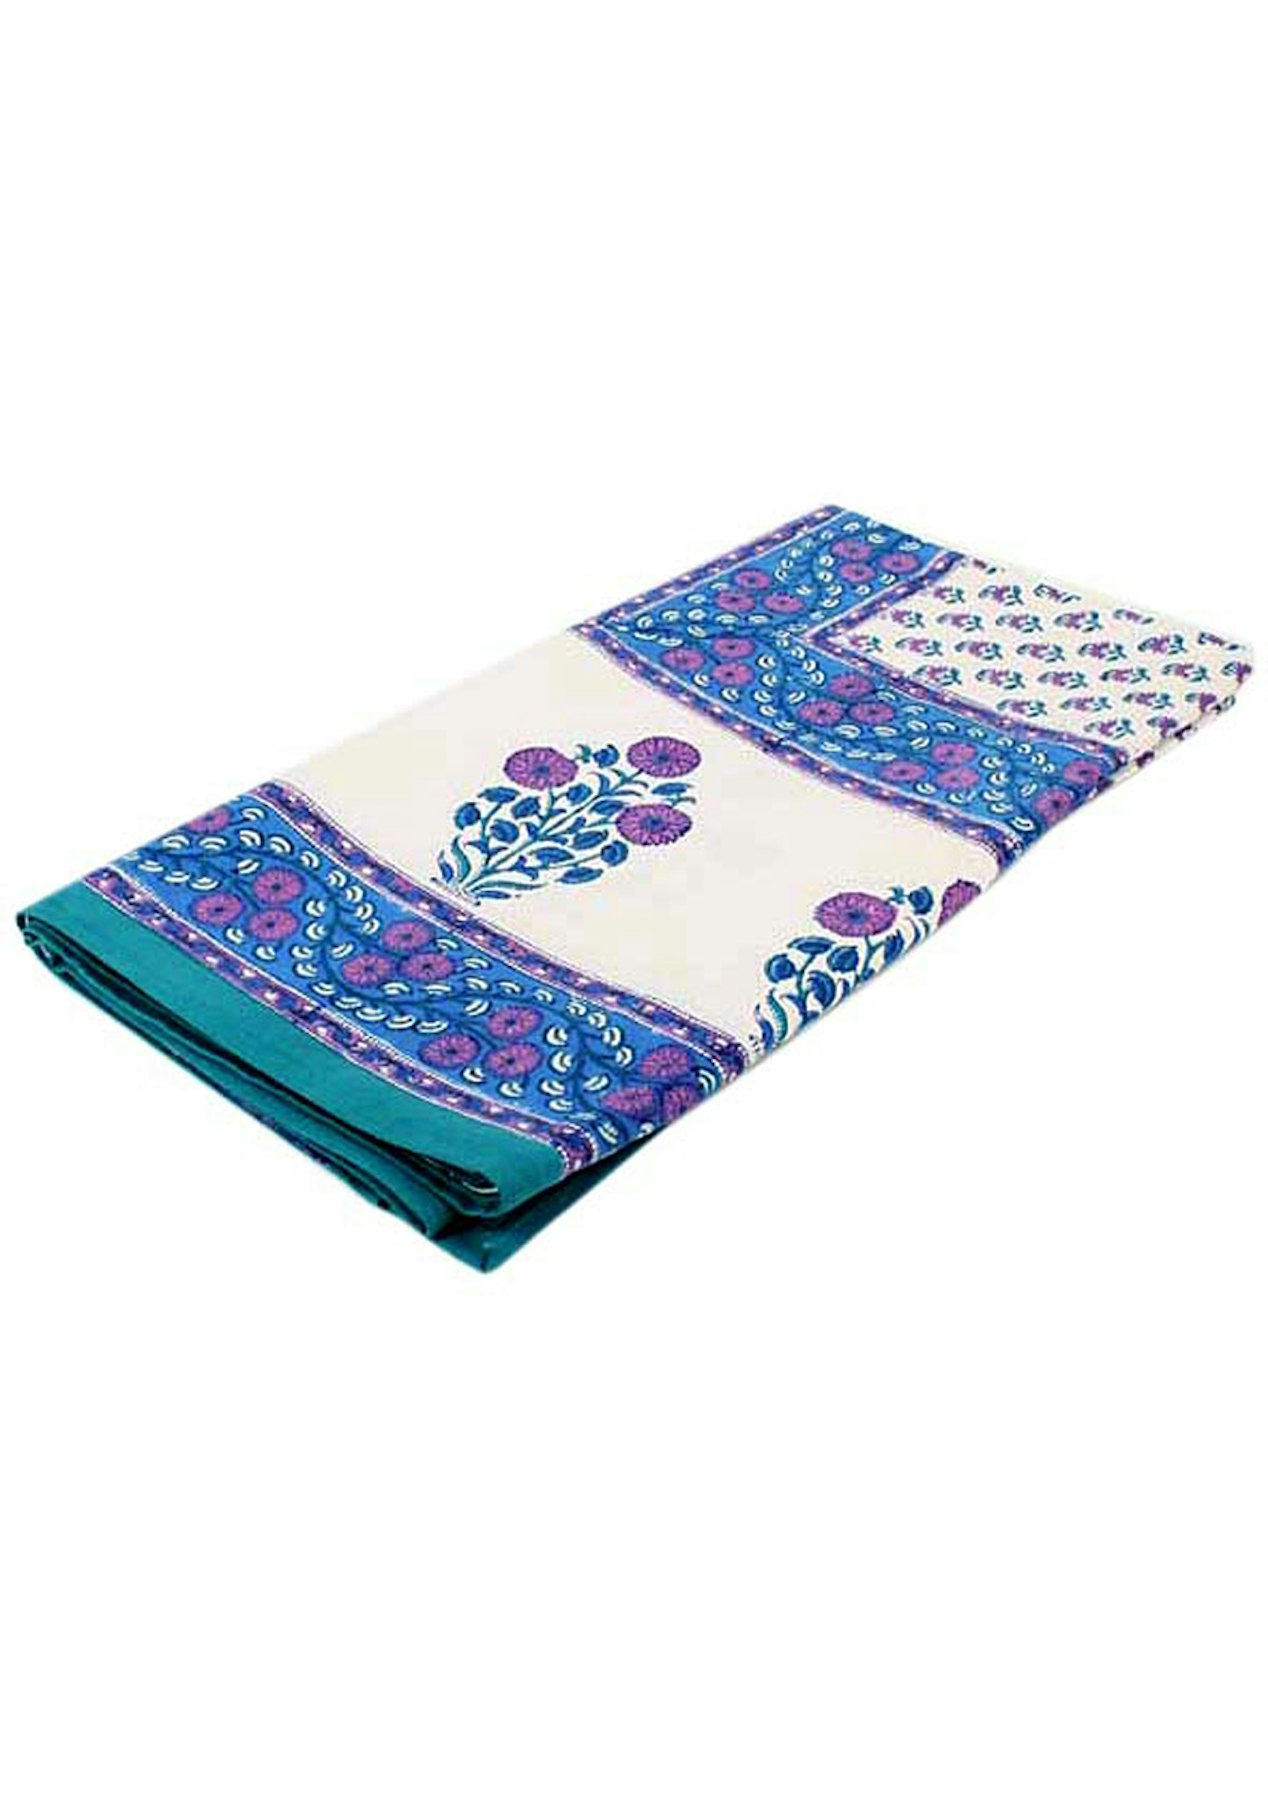 Blue Patterned Queen Bedspread Trade Aid Homewares More Onceit